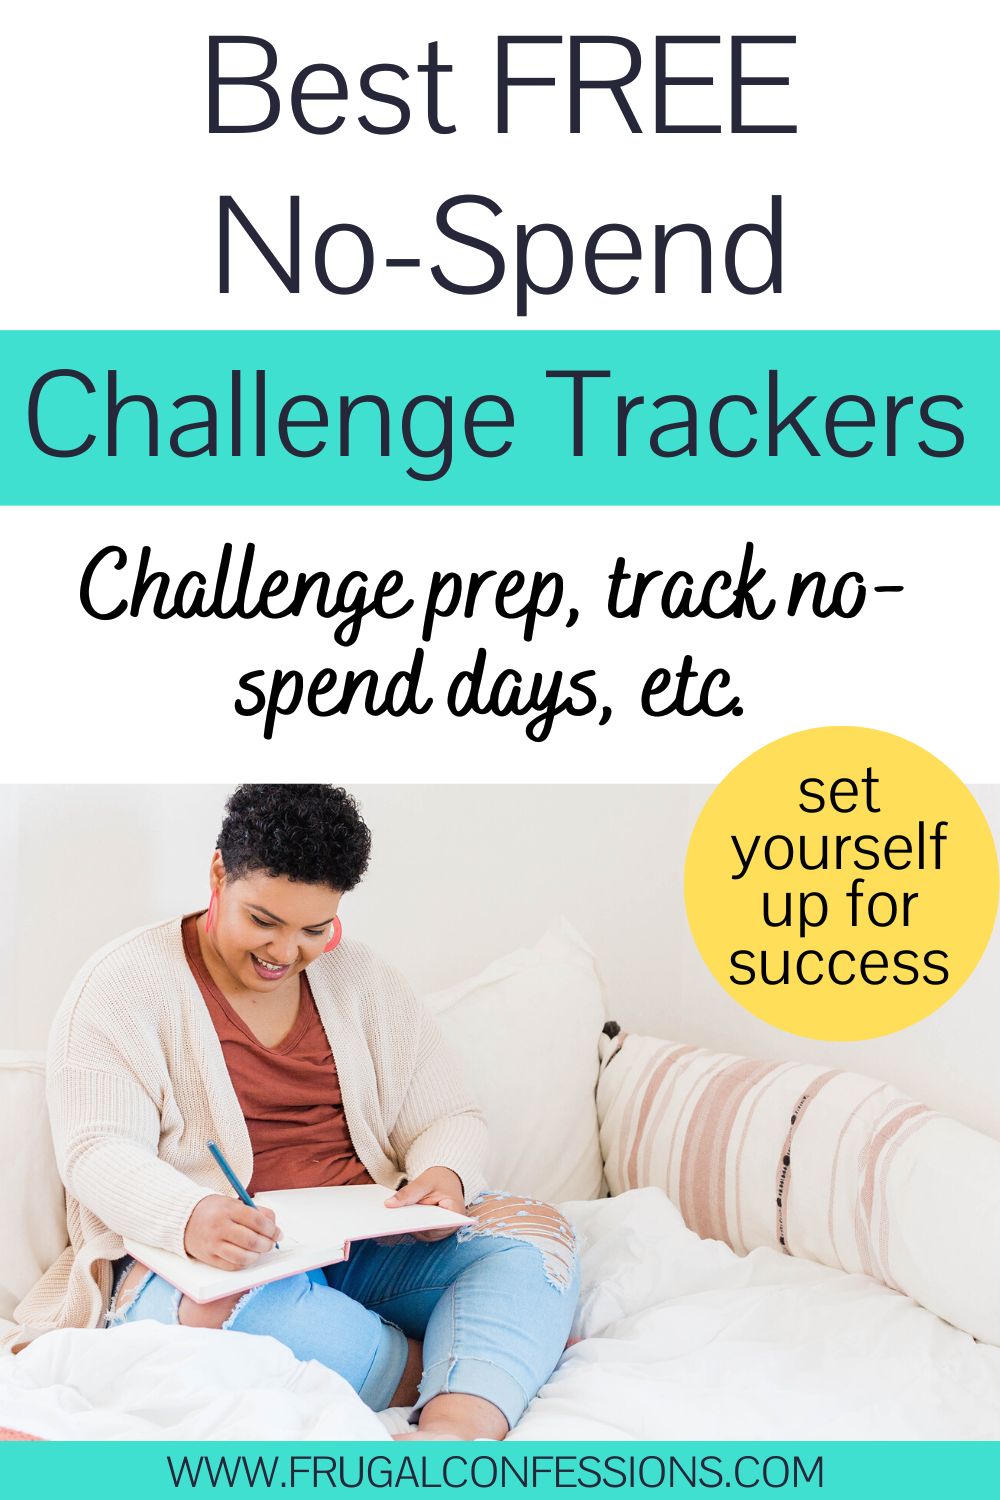 woman in bronze shirt and cardigan filling out tracker on couch, text overlay "best free no spend challenge trackers"